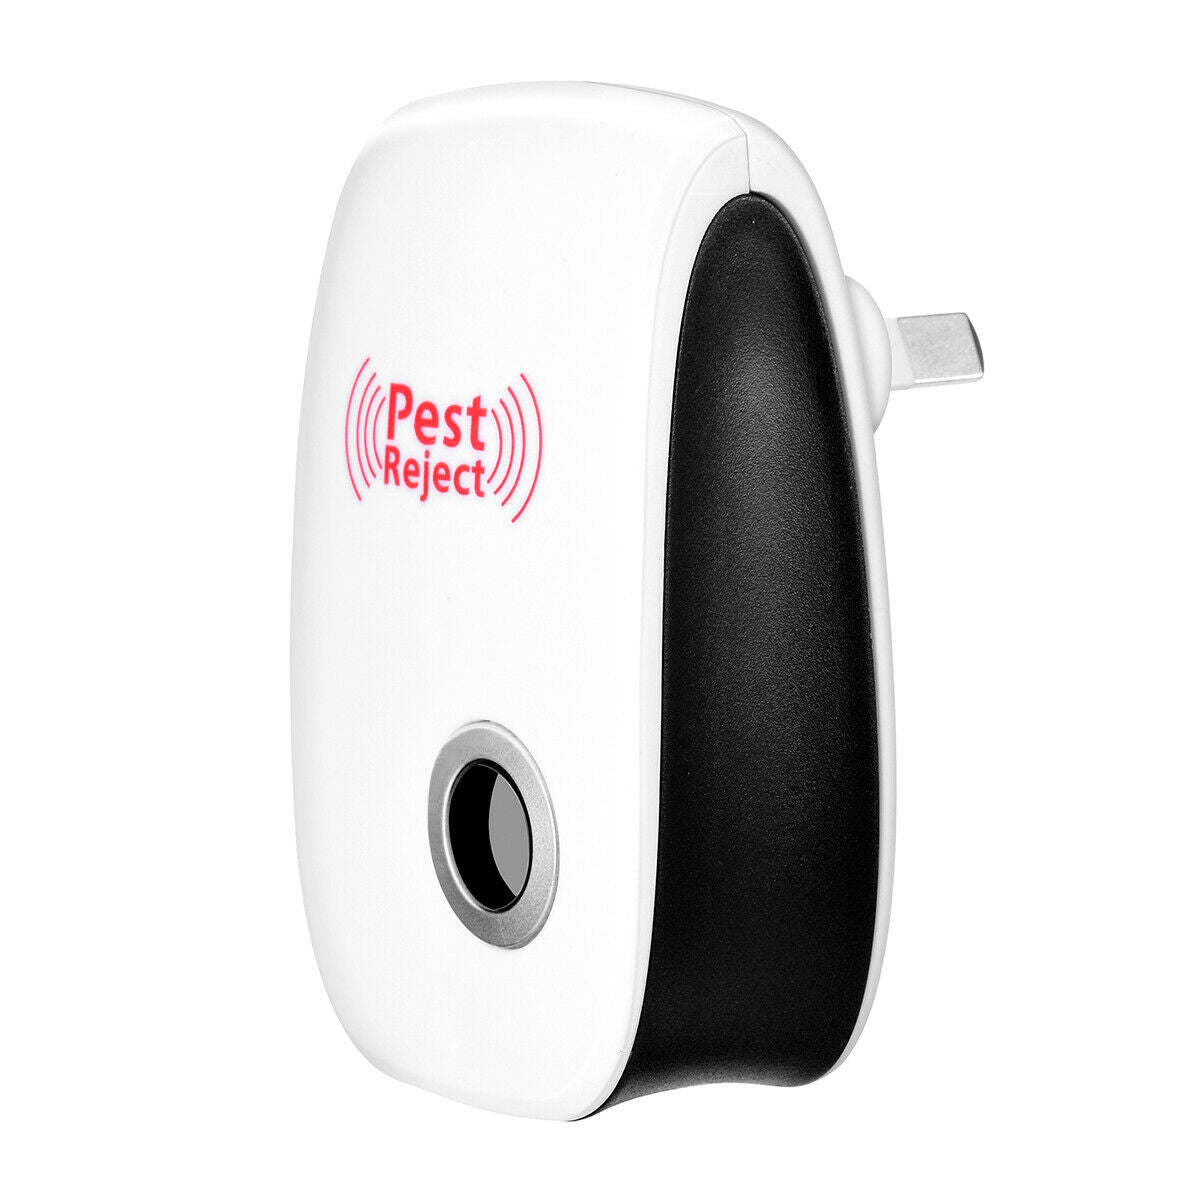 Electronic Ultrasonic Dual Speaker Pest Mouse Insect Repeller 